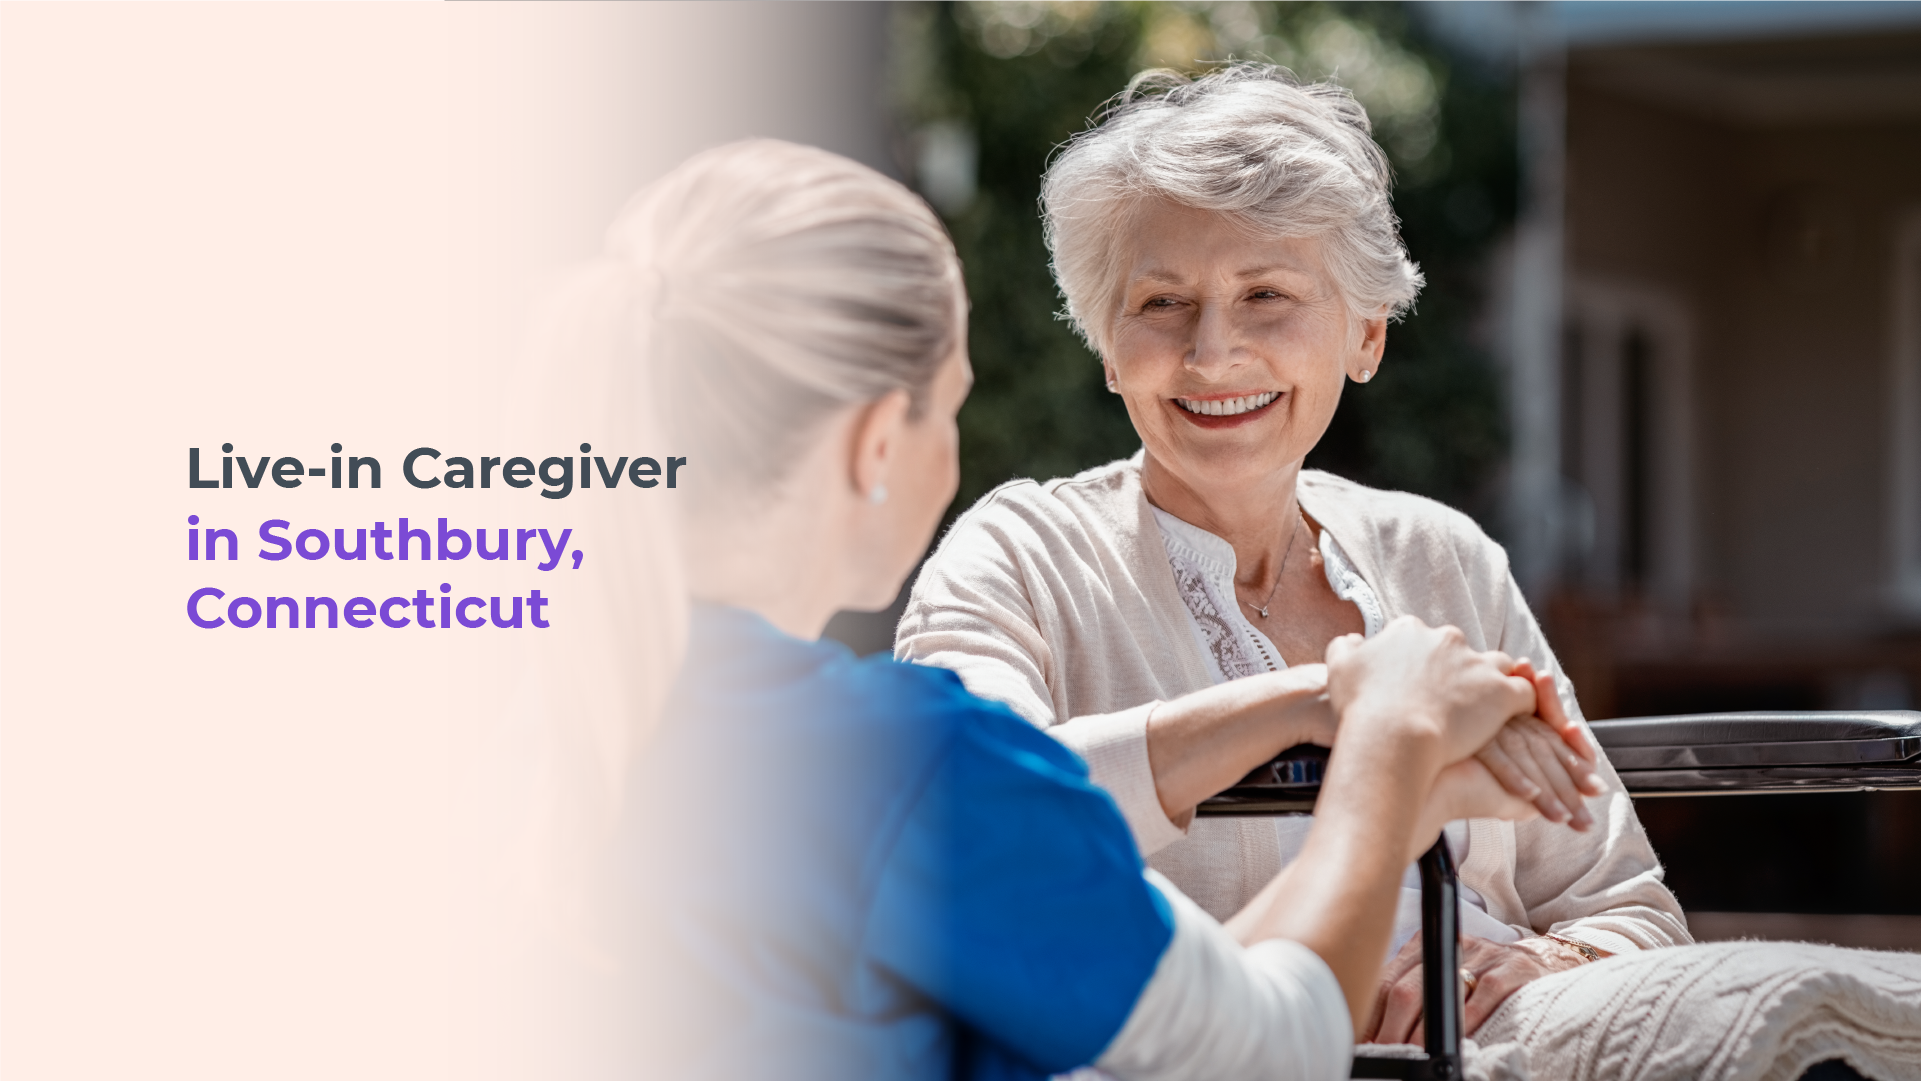 Live-in Caregivers in Southbury